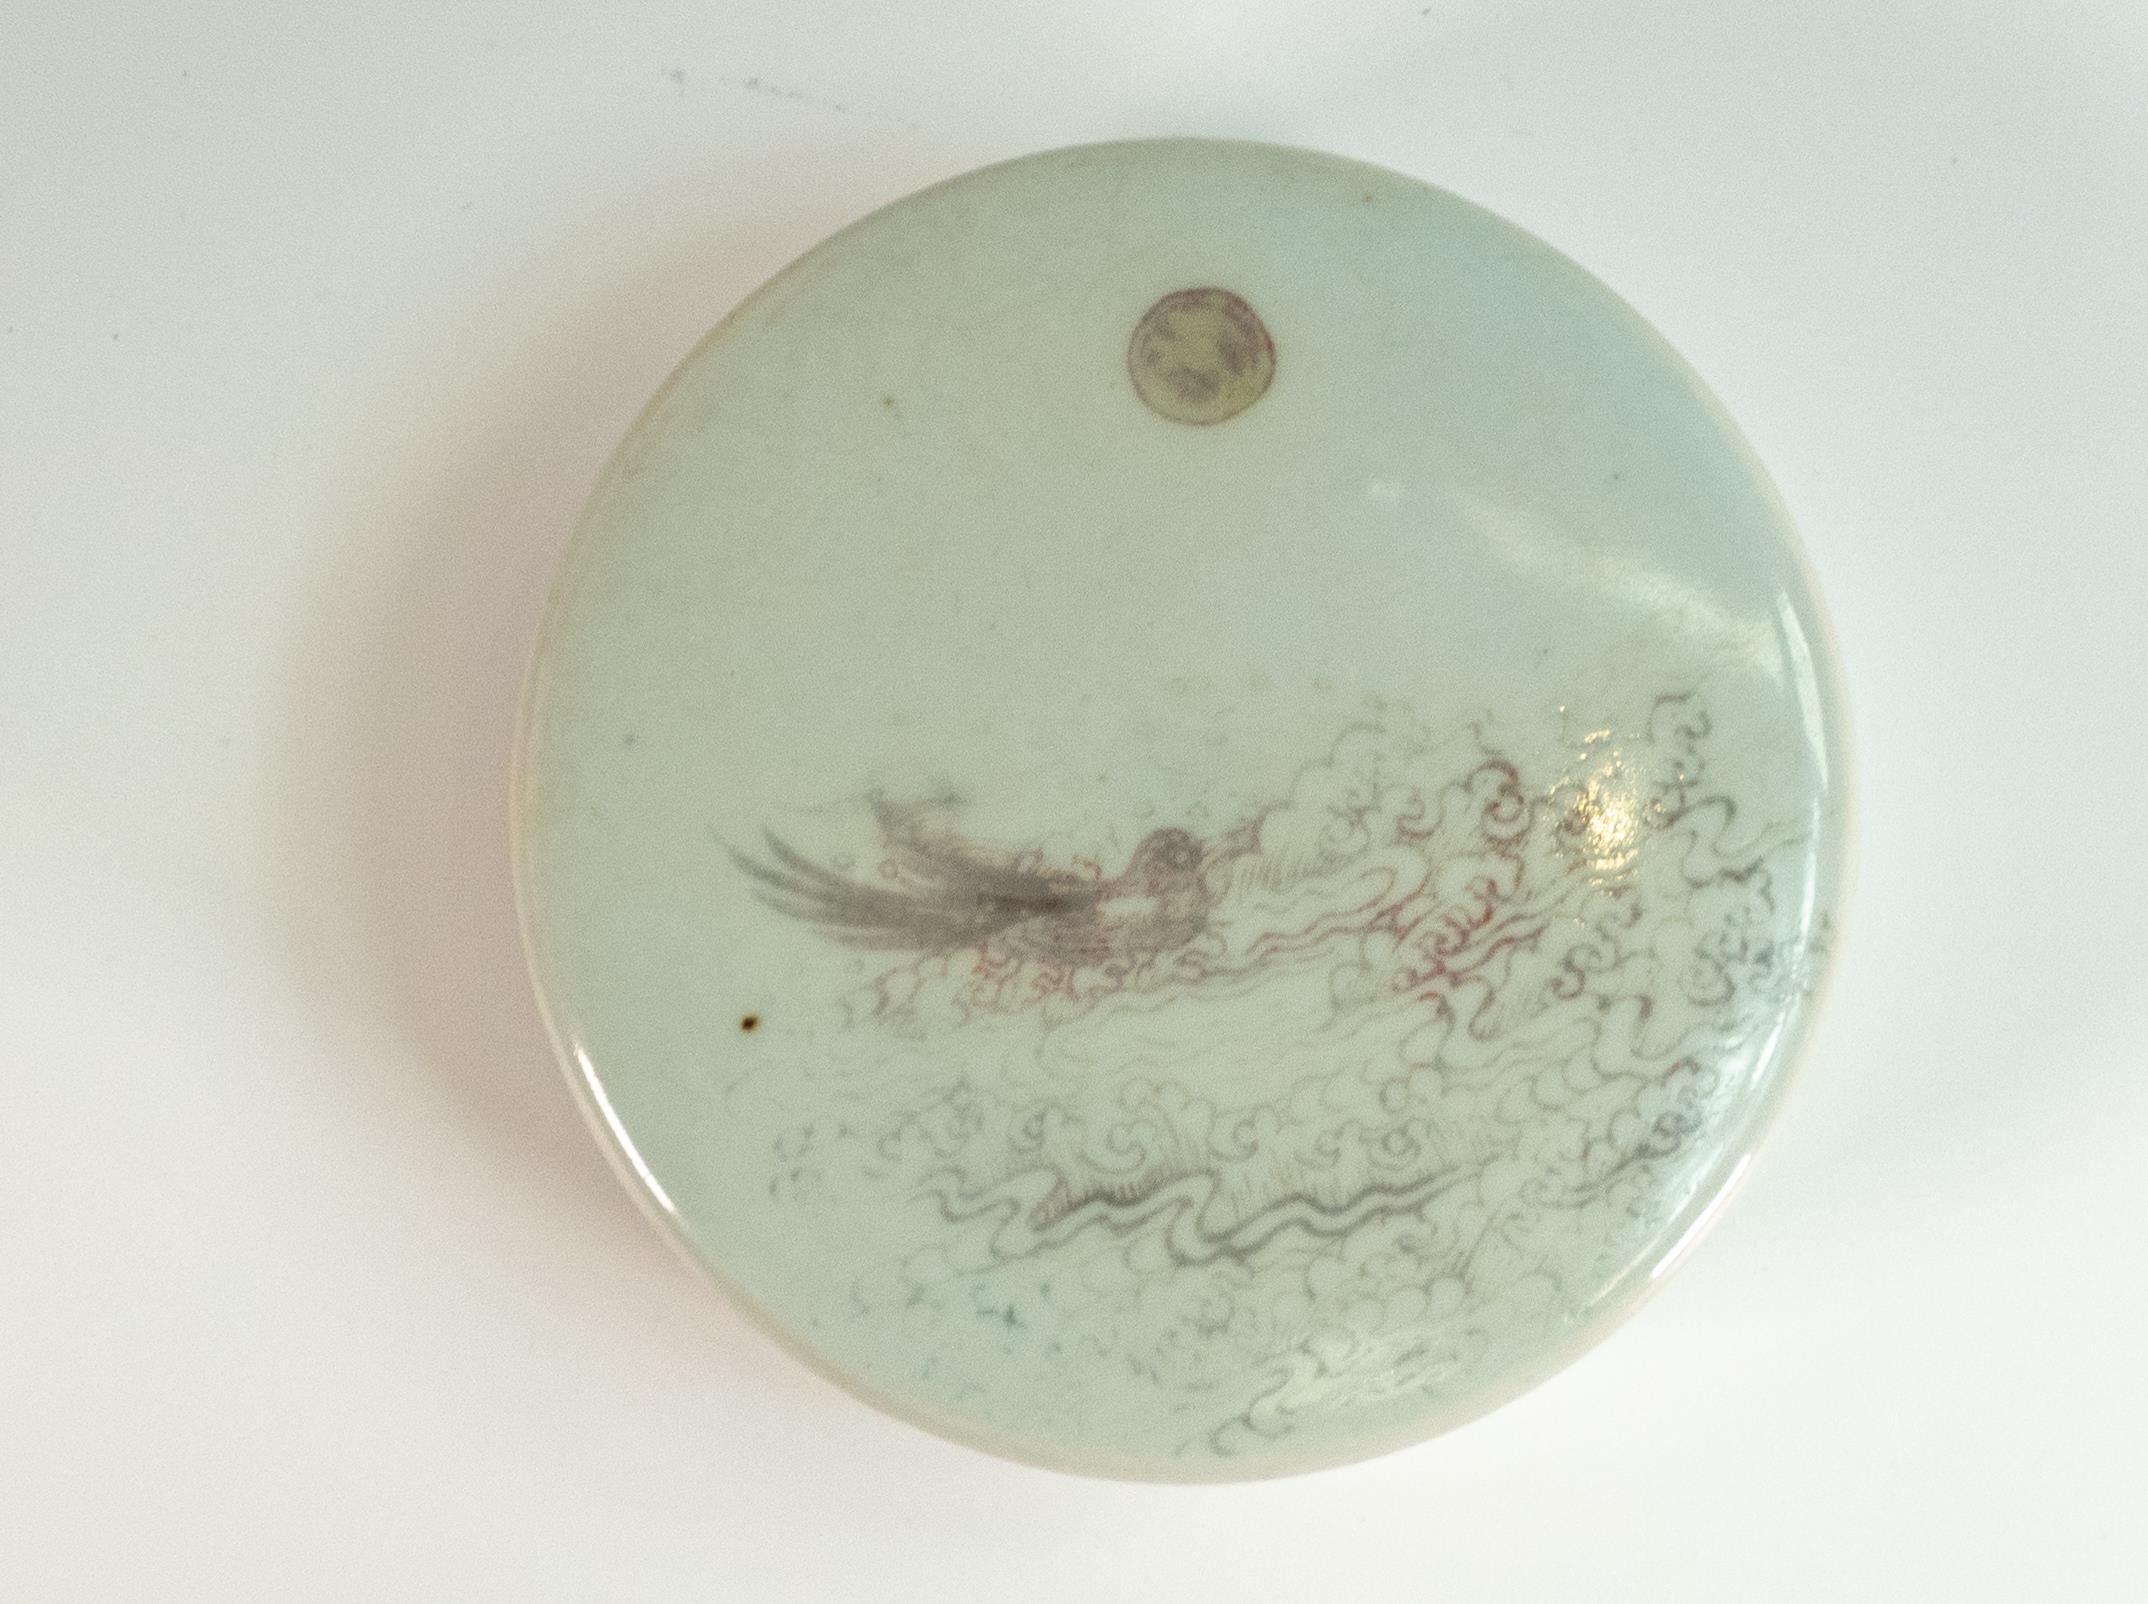 Seal paste box and cover, lid painted with flying bird in a night sky, with moon depicted above. - Image 2 of 4